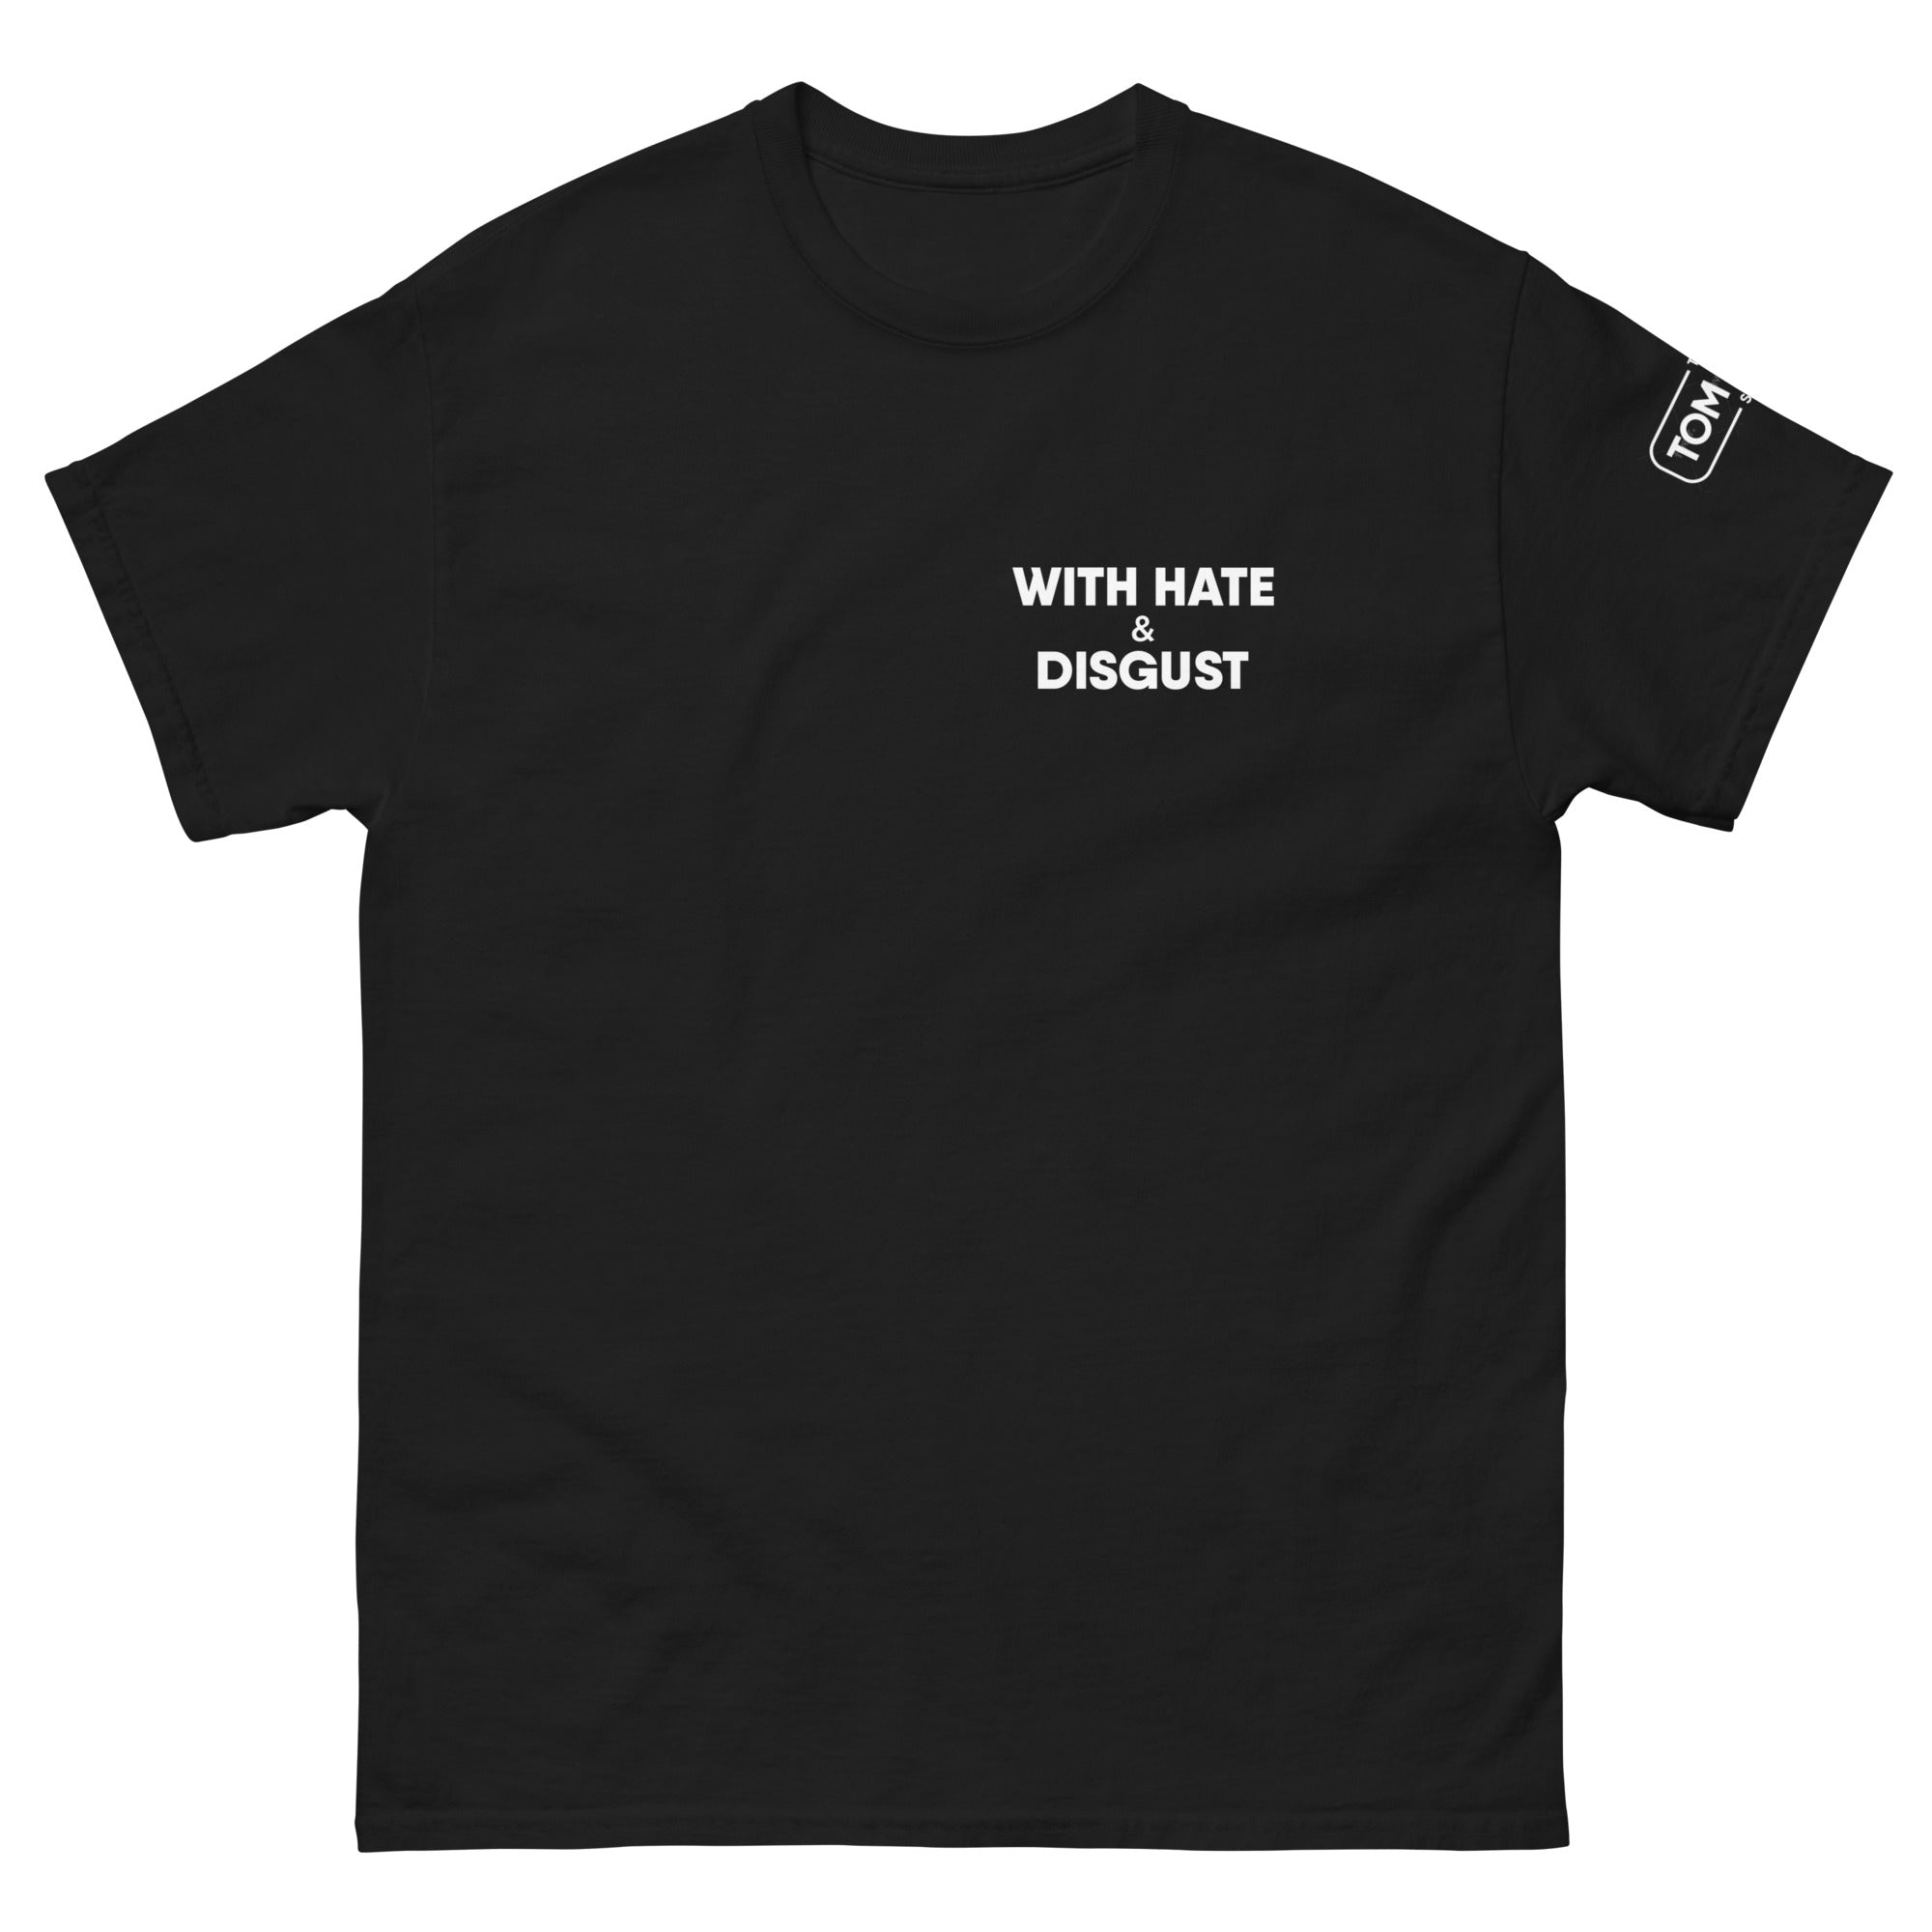 Hate And Disgust Tee - Black